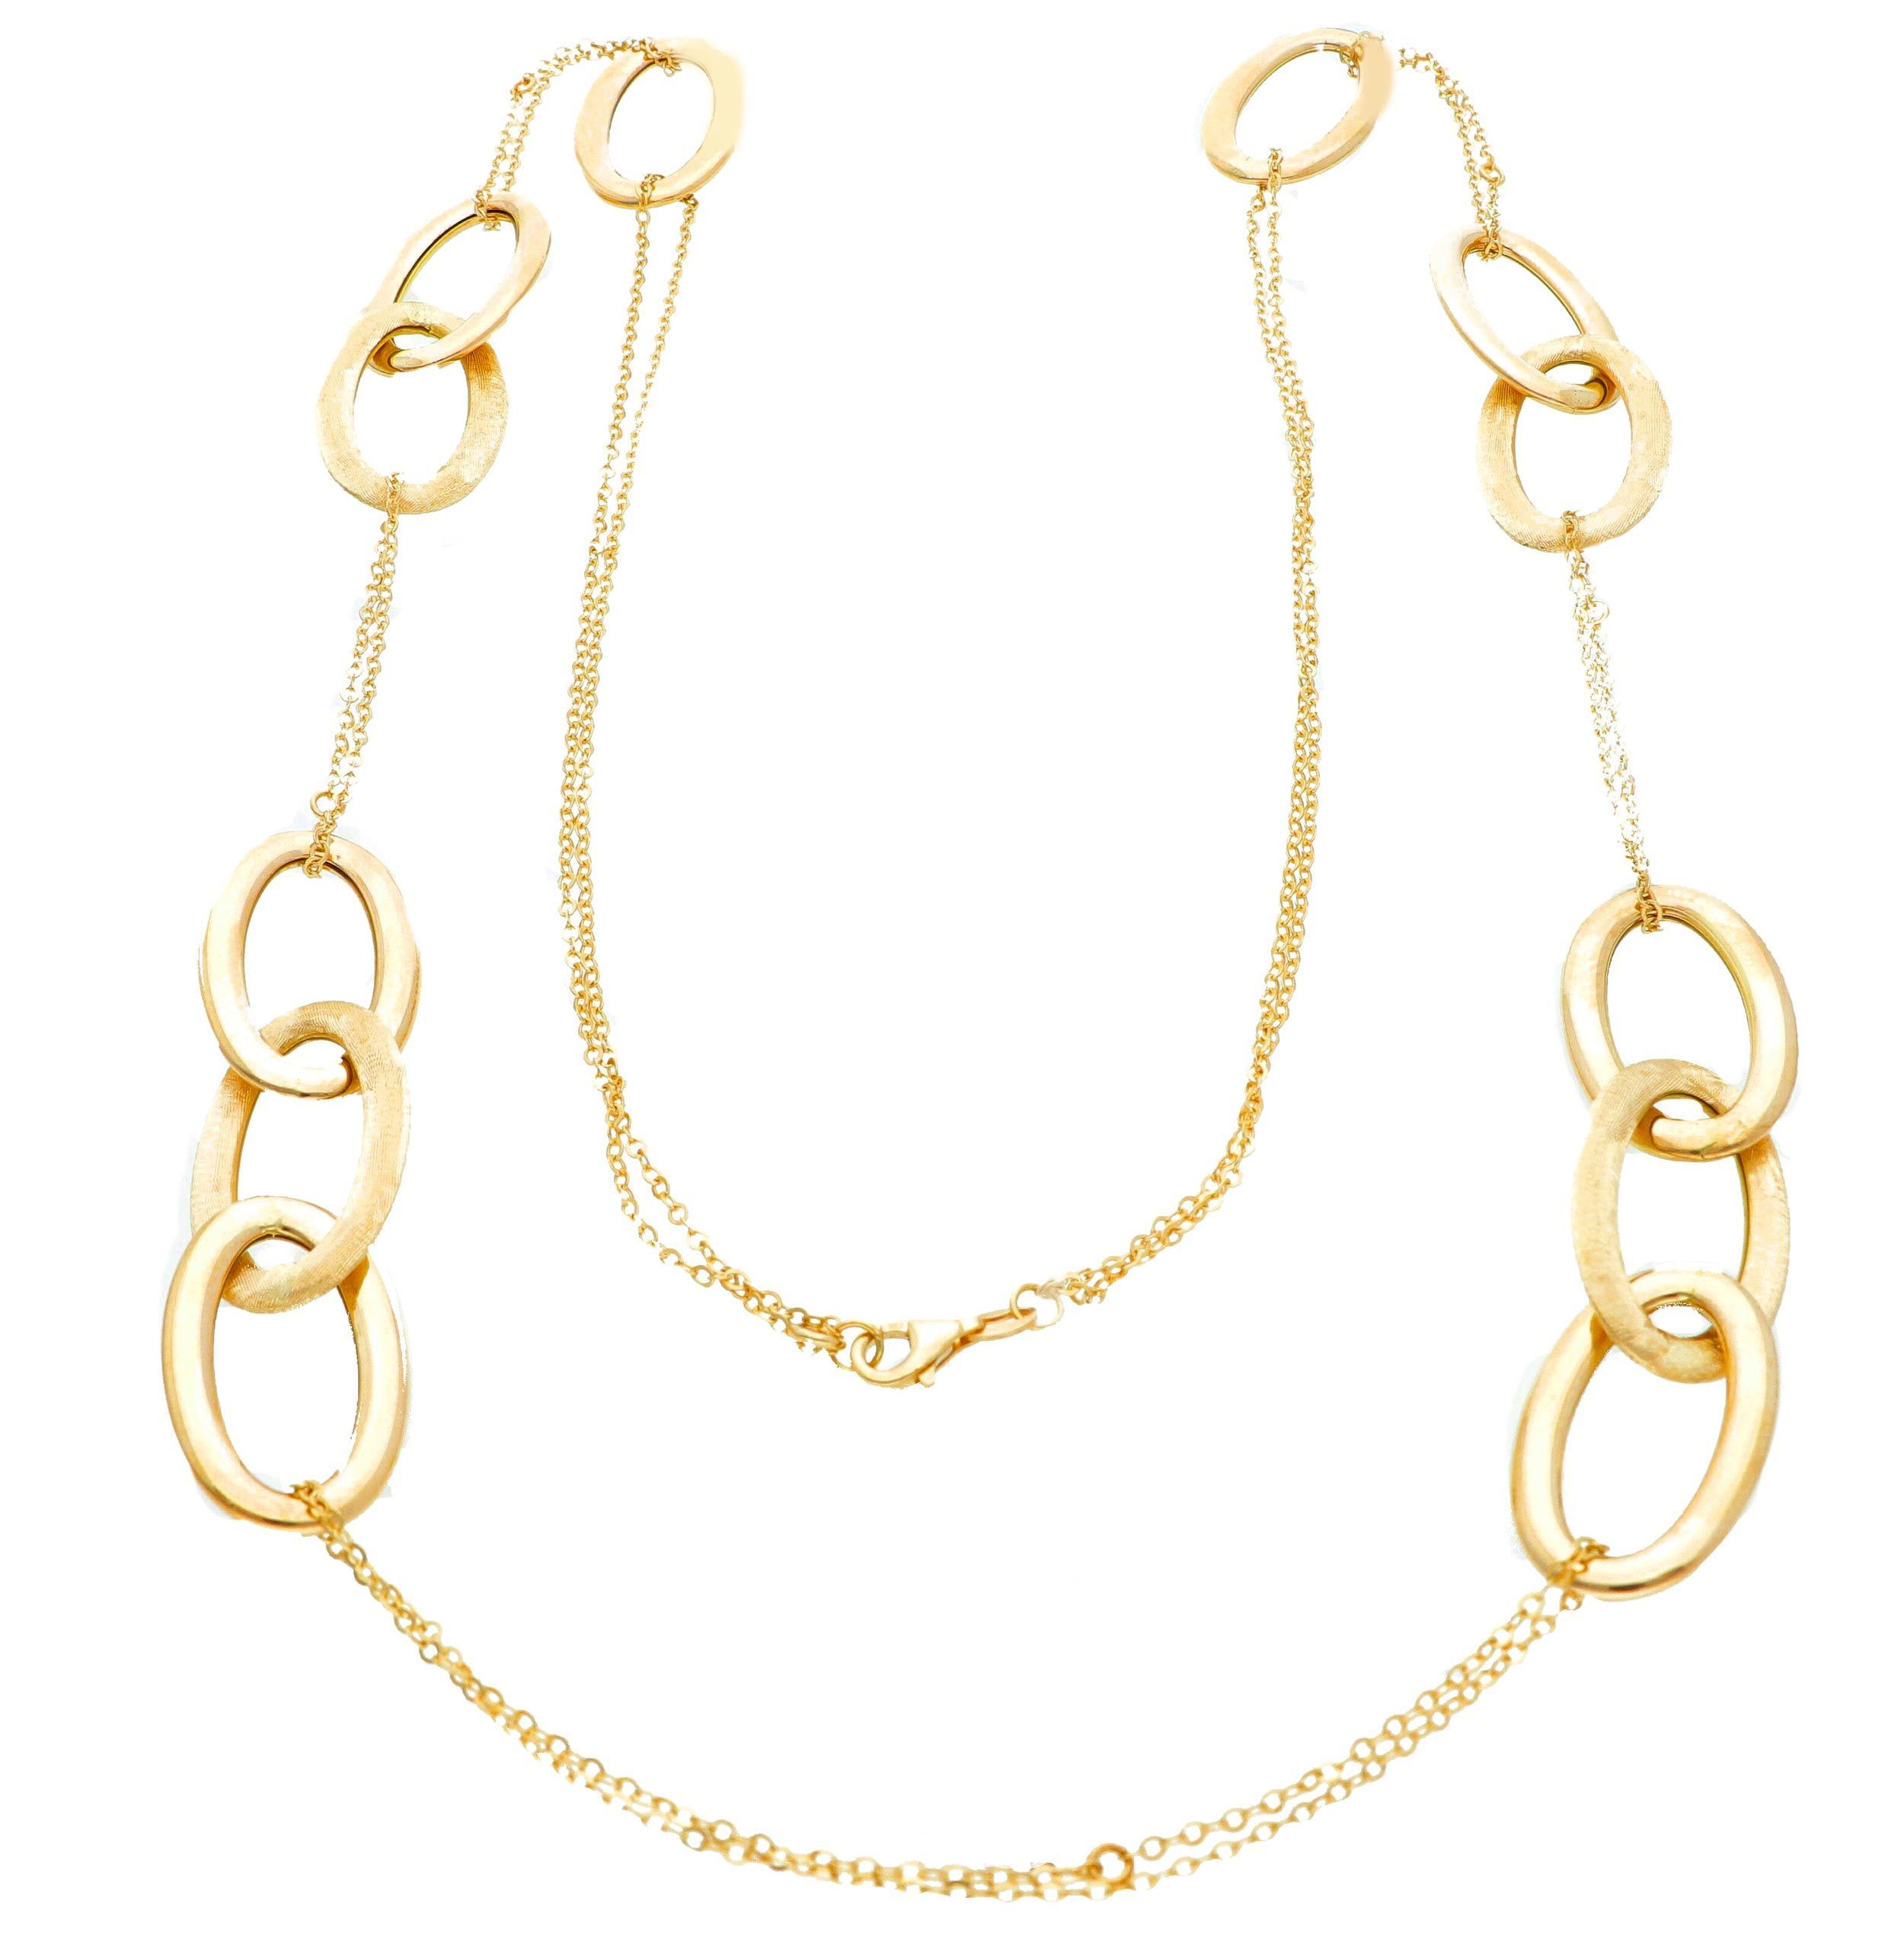 Golden necklace k14 with big golden rings (code S245949)